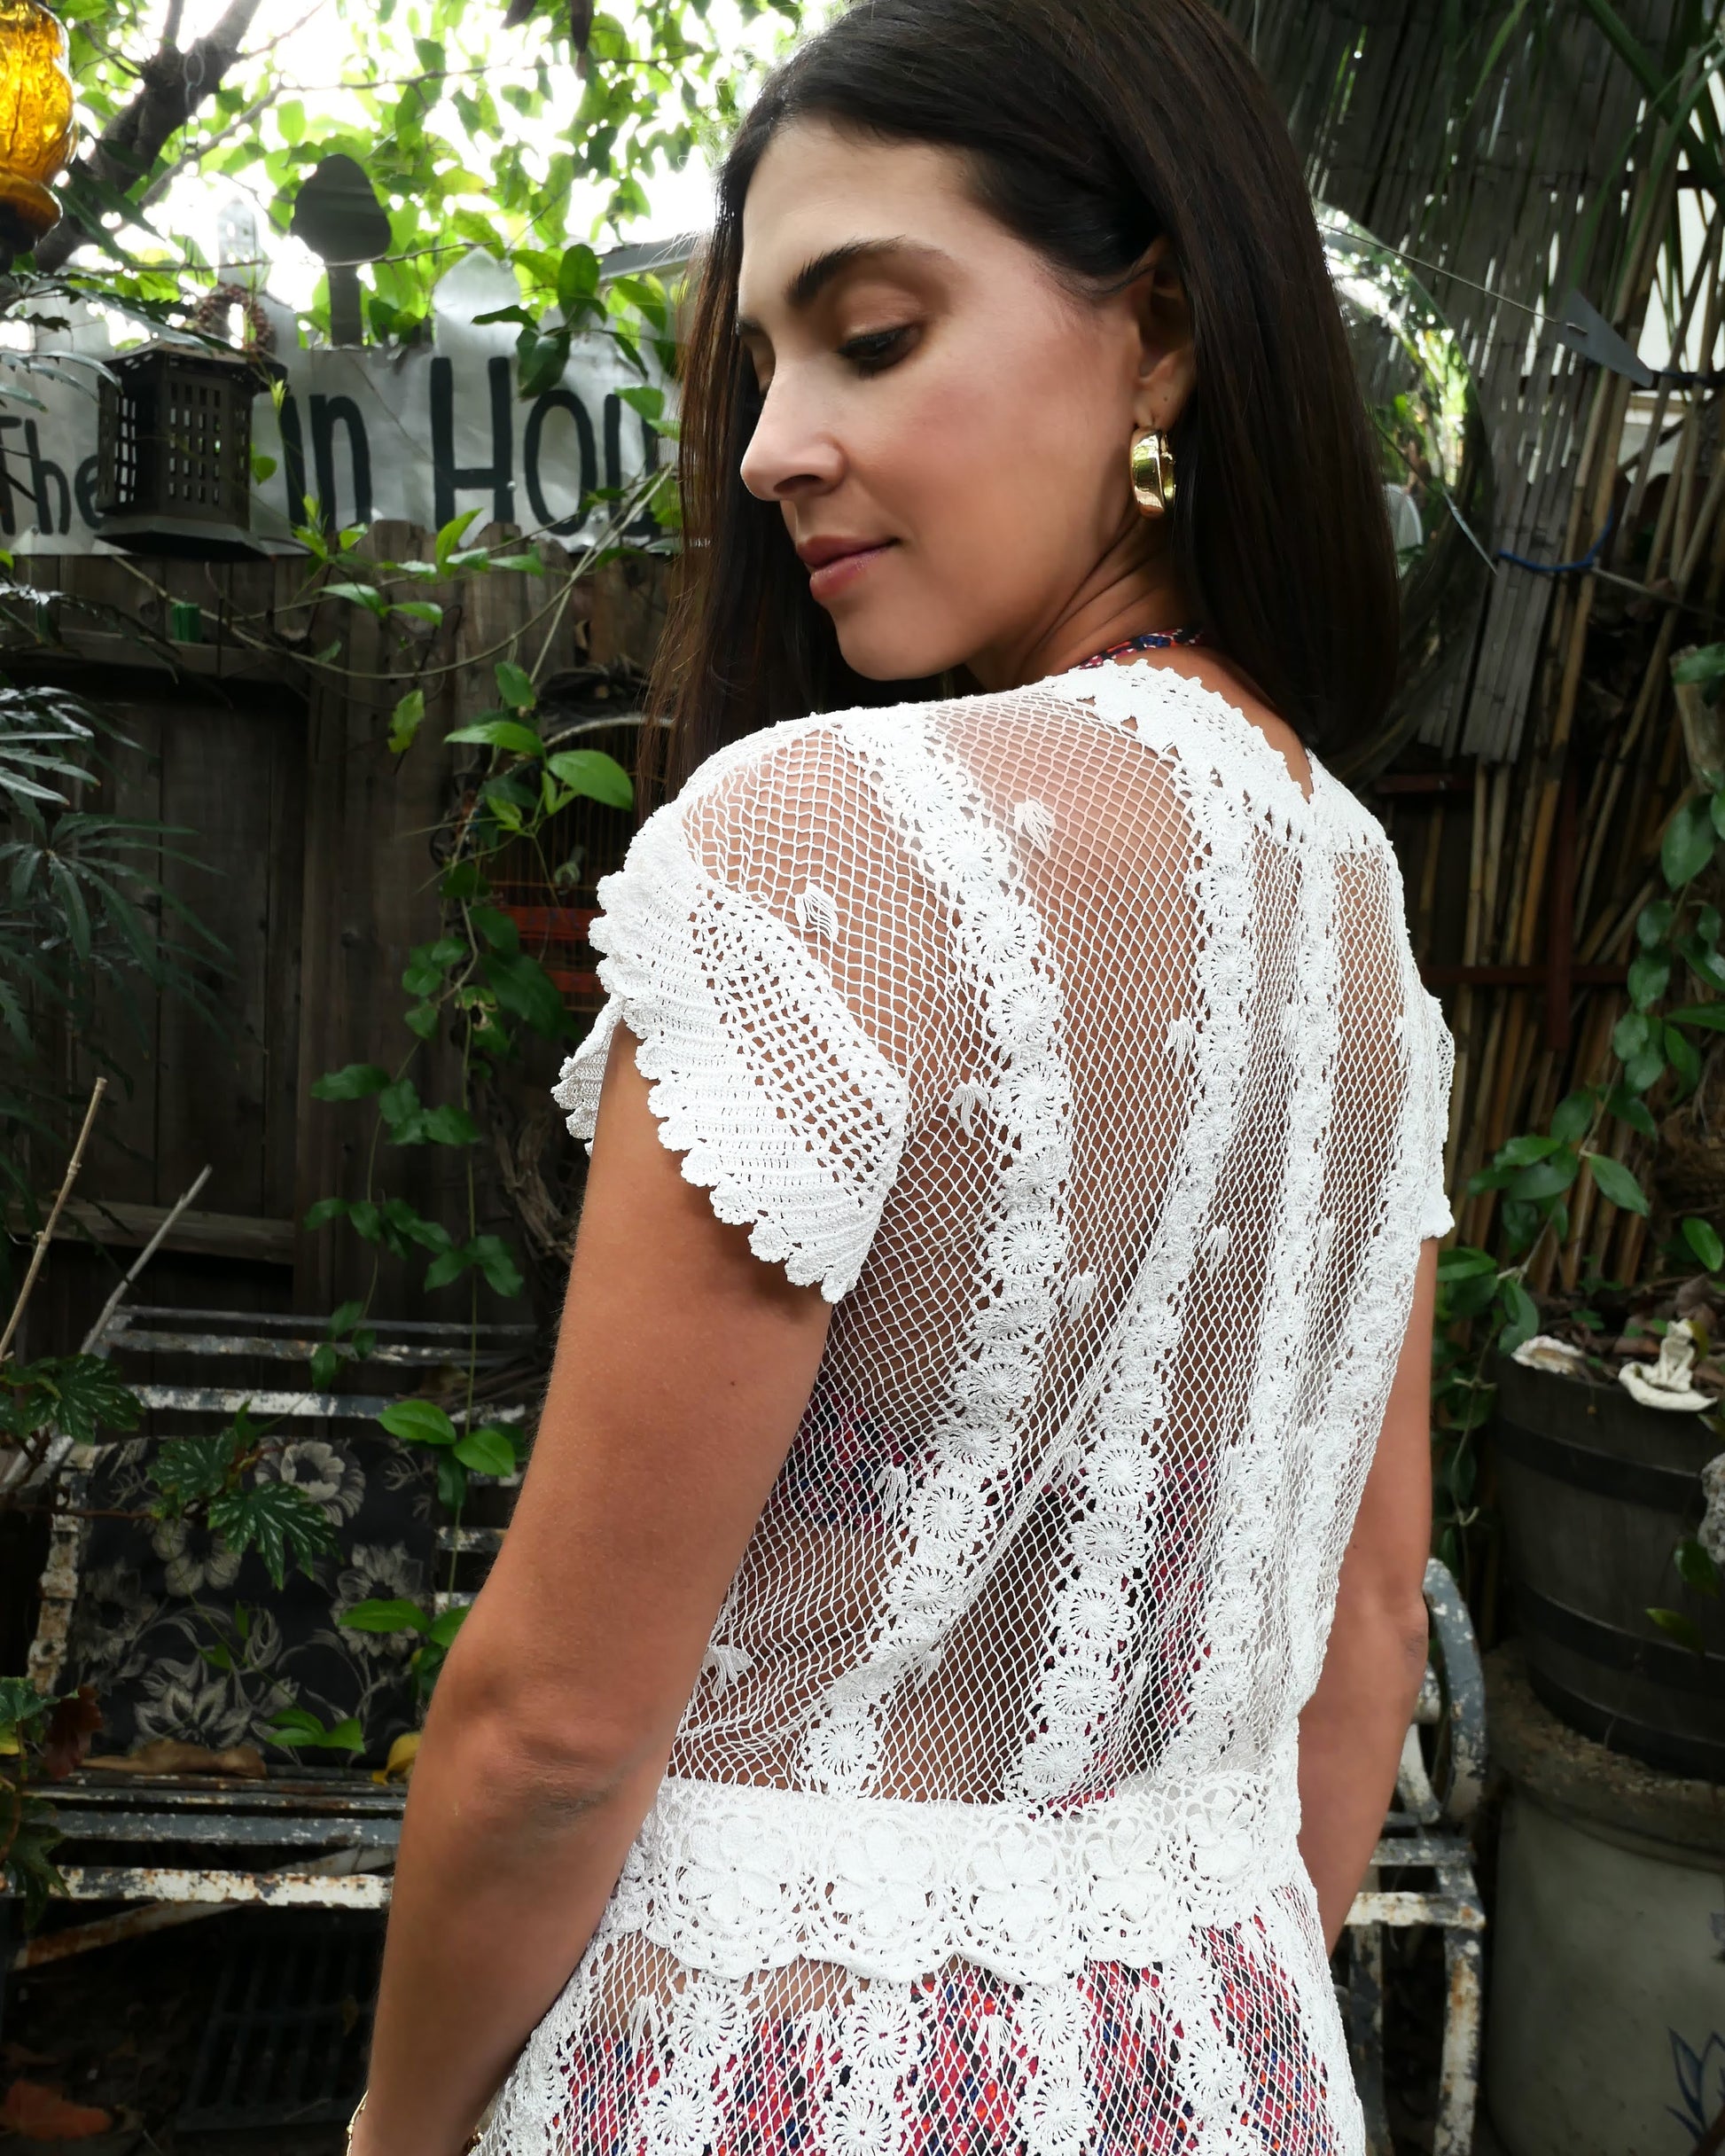 Back view of top. Elegance and vintage charm meet in this sheer, lightweight Lim's Vintage 1980's original crochet top and skirt set made with fine cotton threads. Vertical stripes composed of connected pinwheel-like circles run up and down the body of the top and skirt, while delicate floral motif trim runs along the bottom hem. The collar and cap sleeves are adorned with simple hand crocheted trim, and the skirt has a comfortable elastic waistband. Color: White